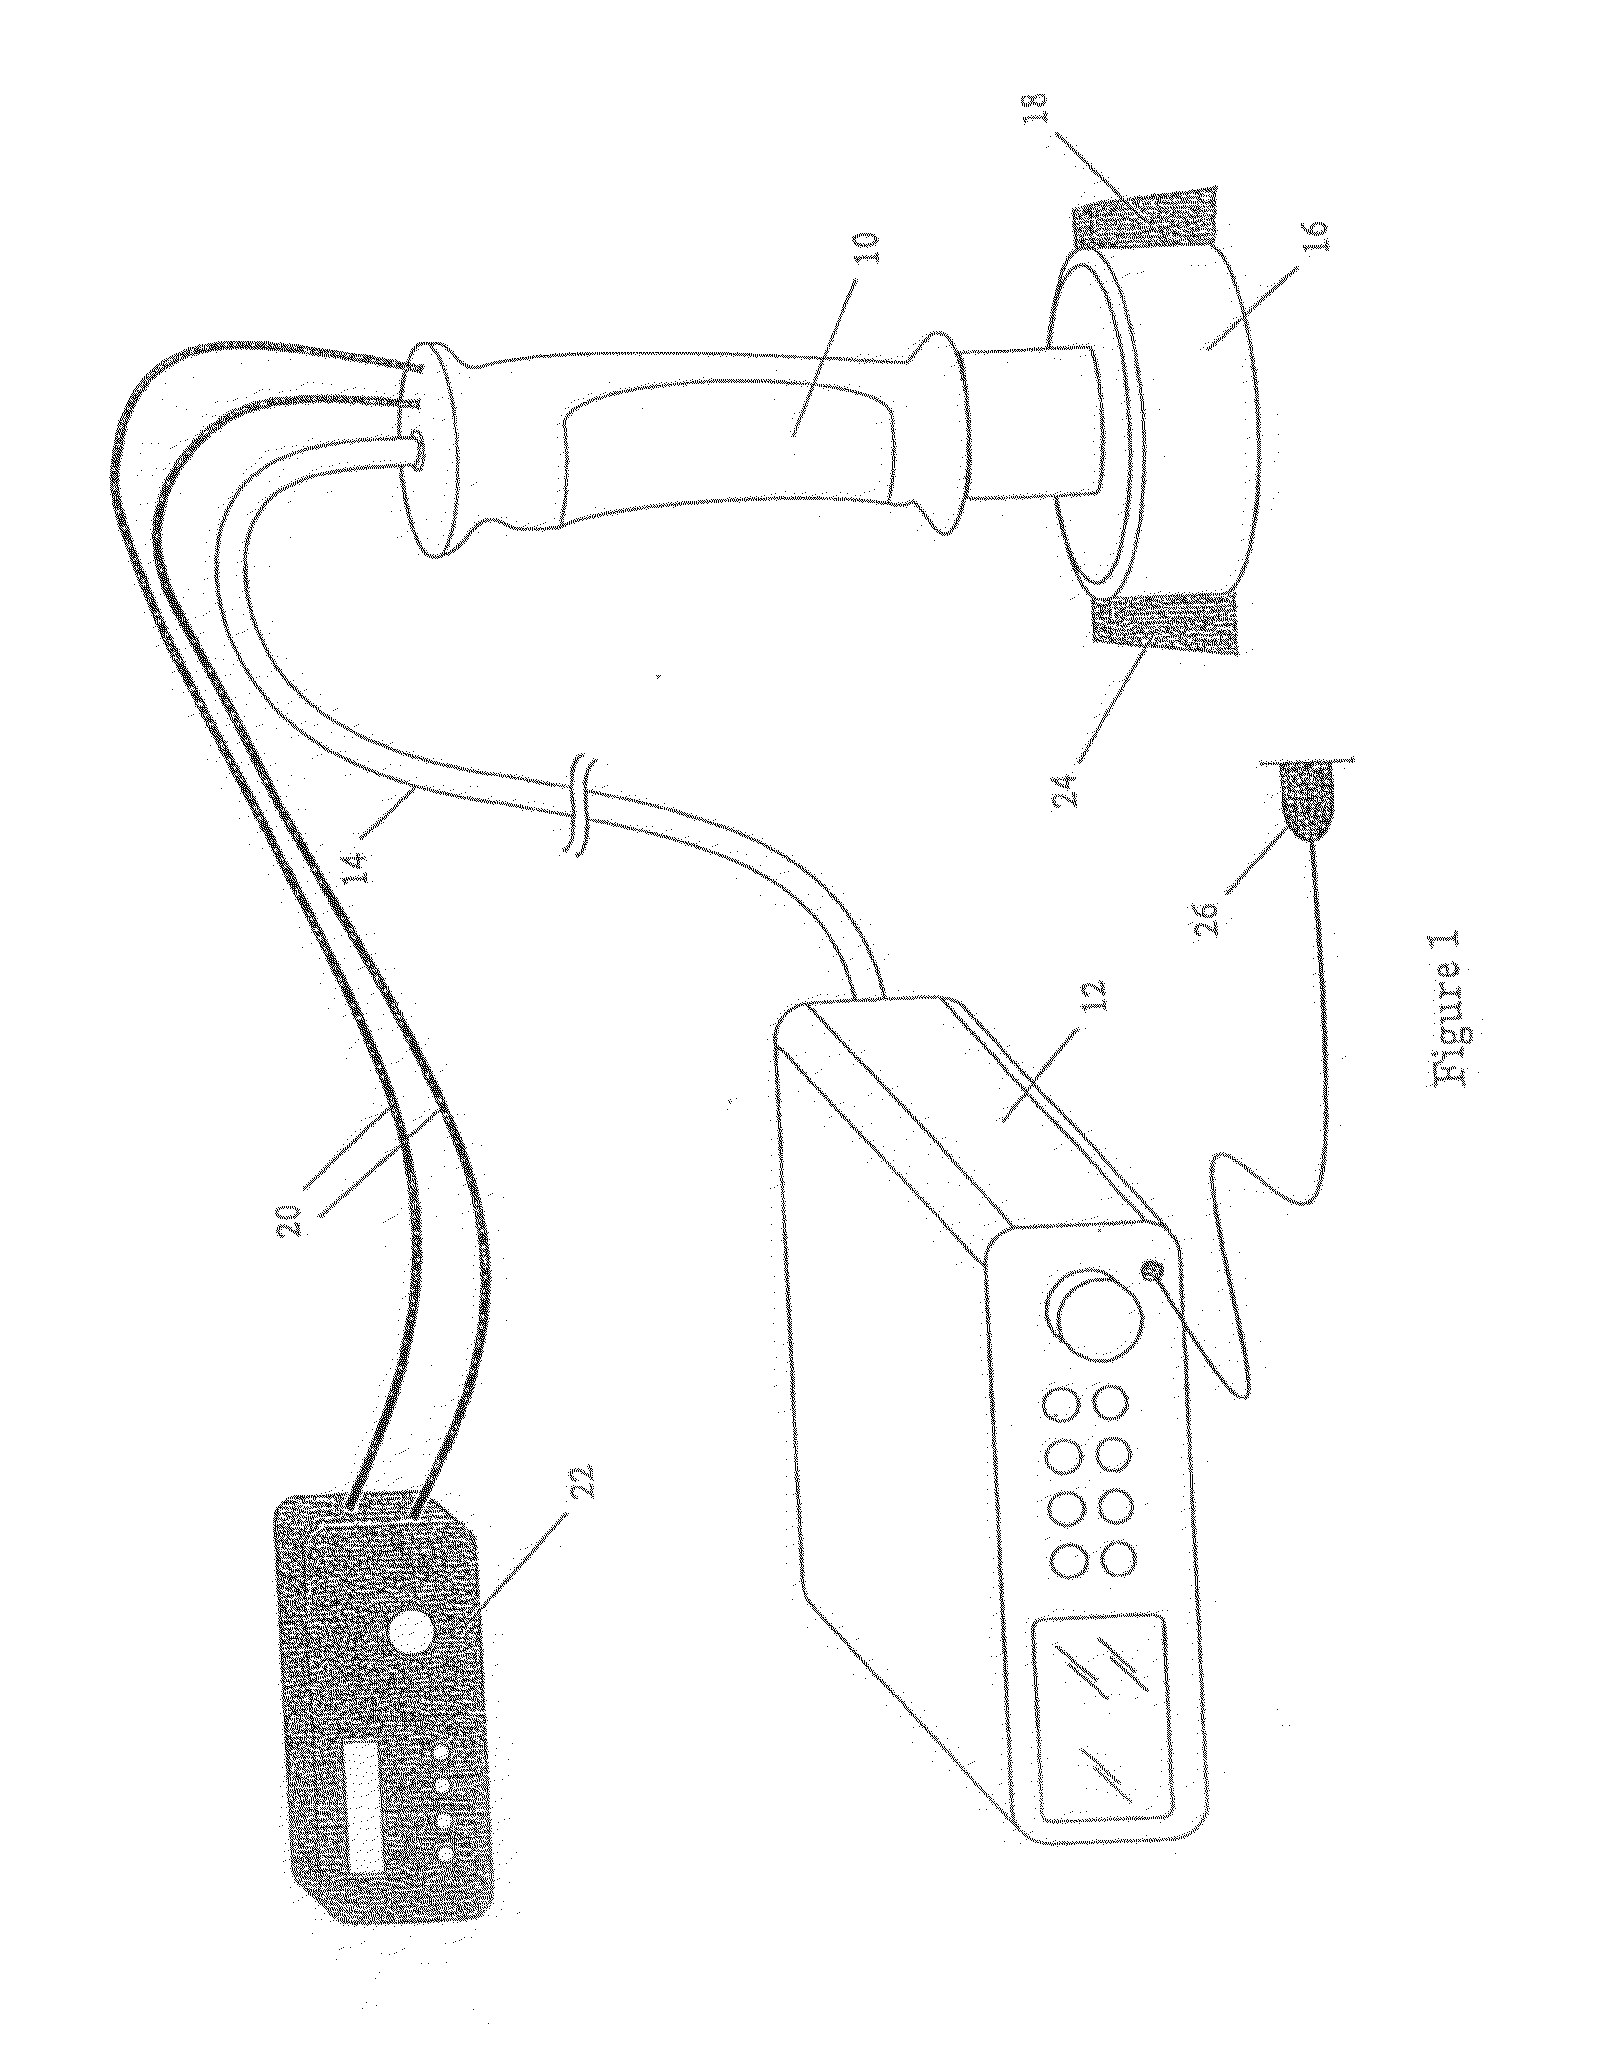 Devices and methods for non-invasive ultrasound-guided body contouring using skin contact cooling